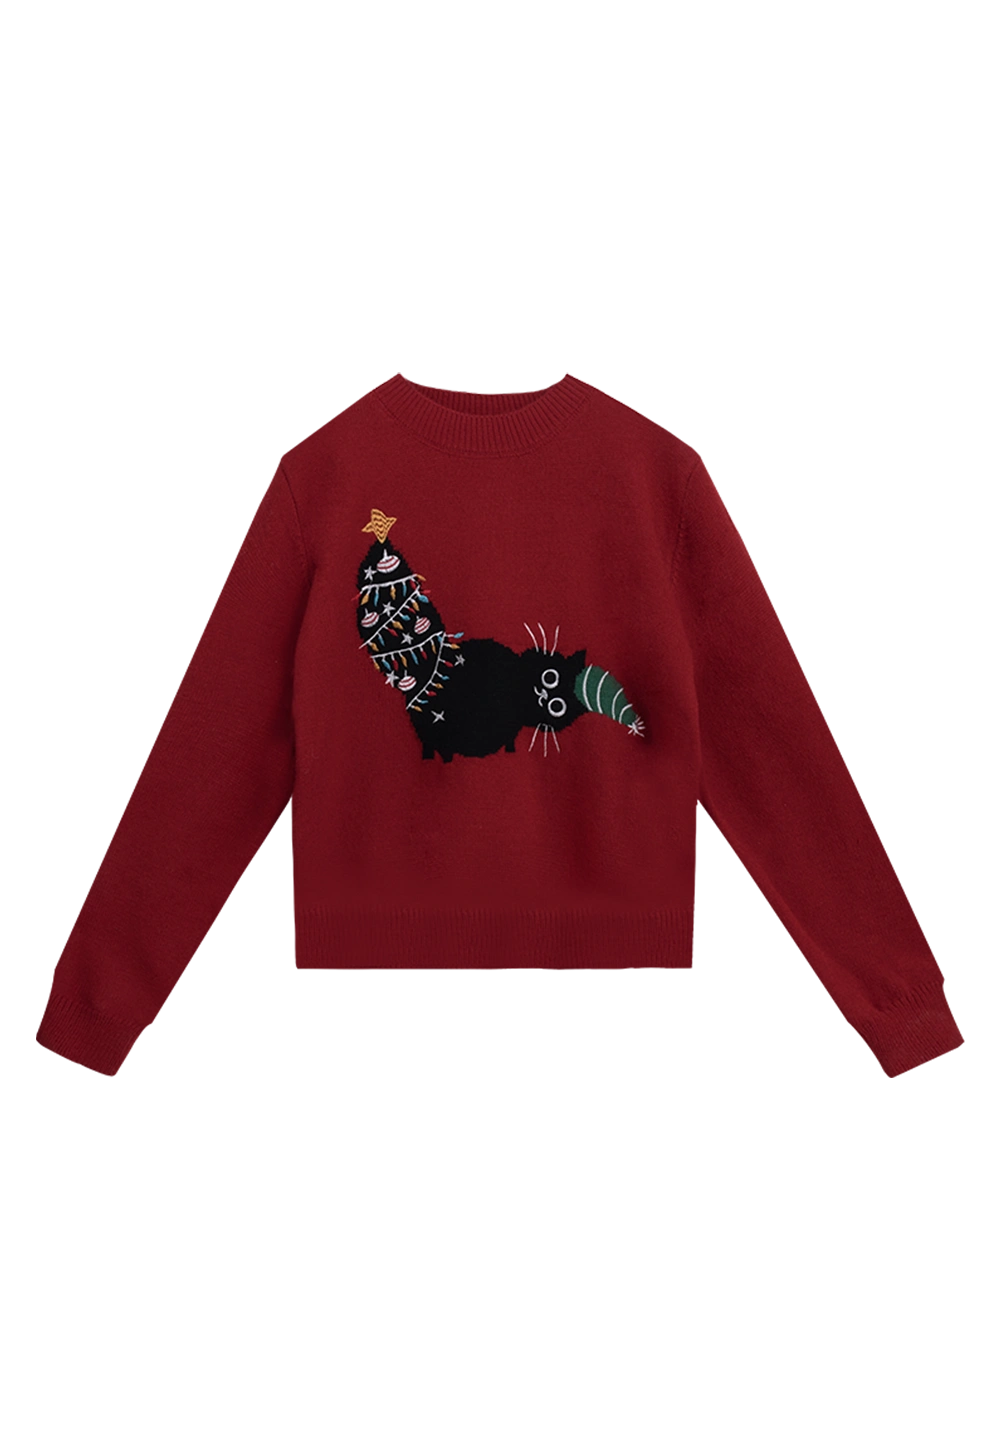 Women's Festive Sweater with Cat and Christmas Tree Embroidery